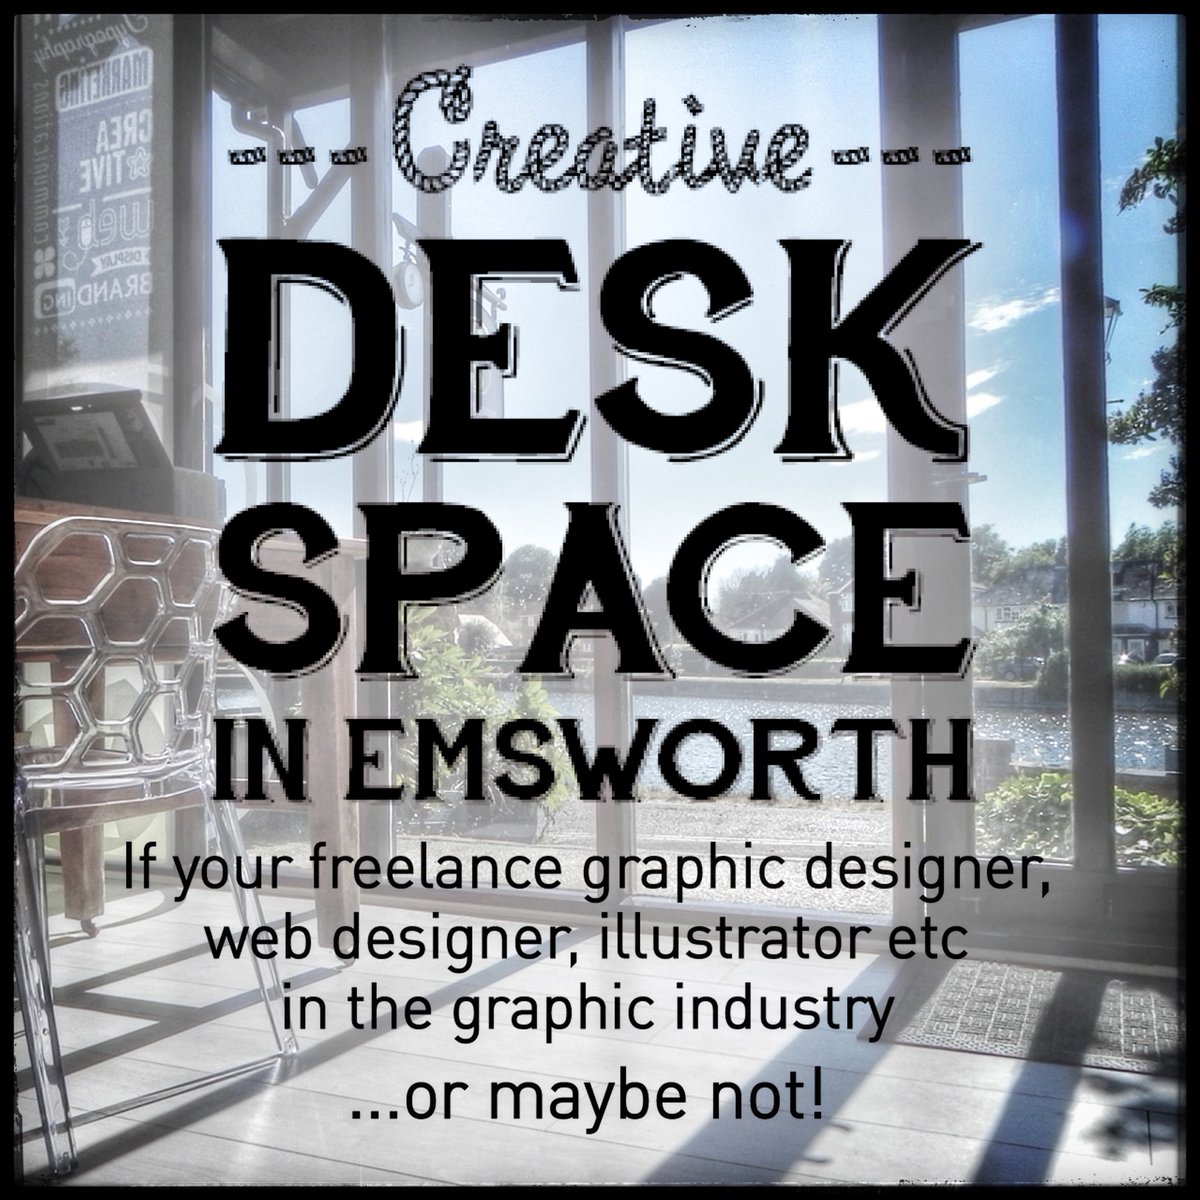 We’ve got desk space to rent! If you’re tired of working from home or just want to work in a creative studio drop us a line #emsworth #deskspace #studio #rent #creative #portsmouth #havant #design #freelance #fix8 #fix8design #strongisland #emsworthlife #emsworthonline #hampshire